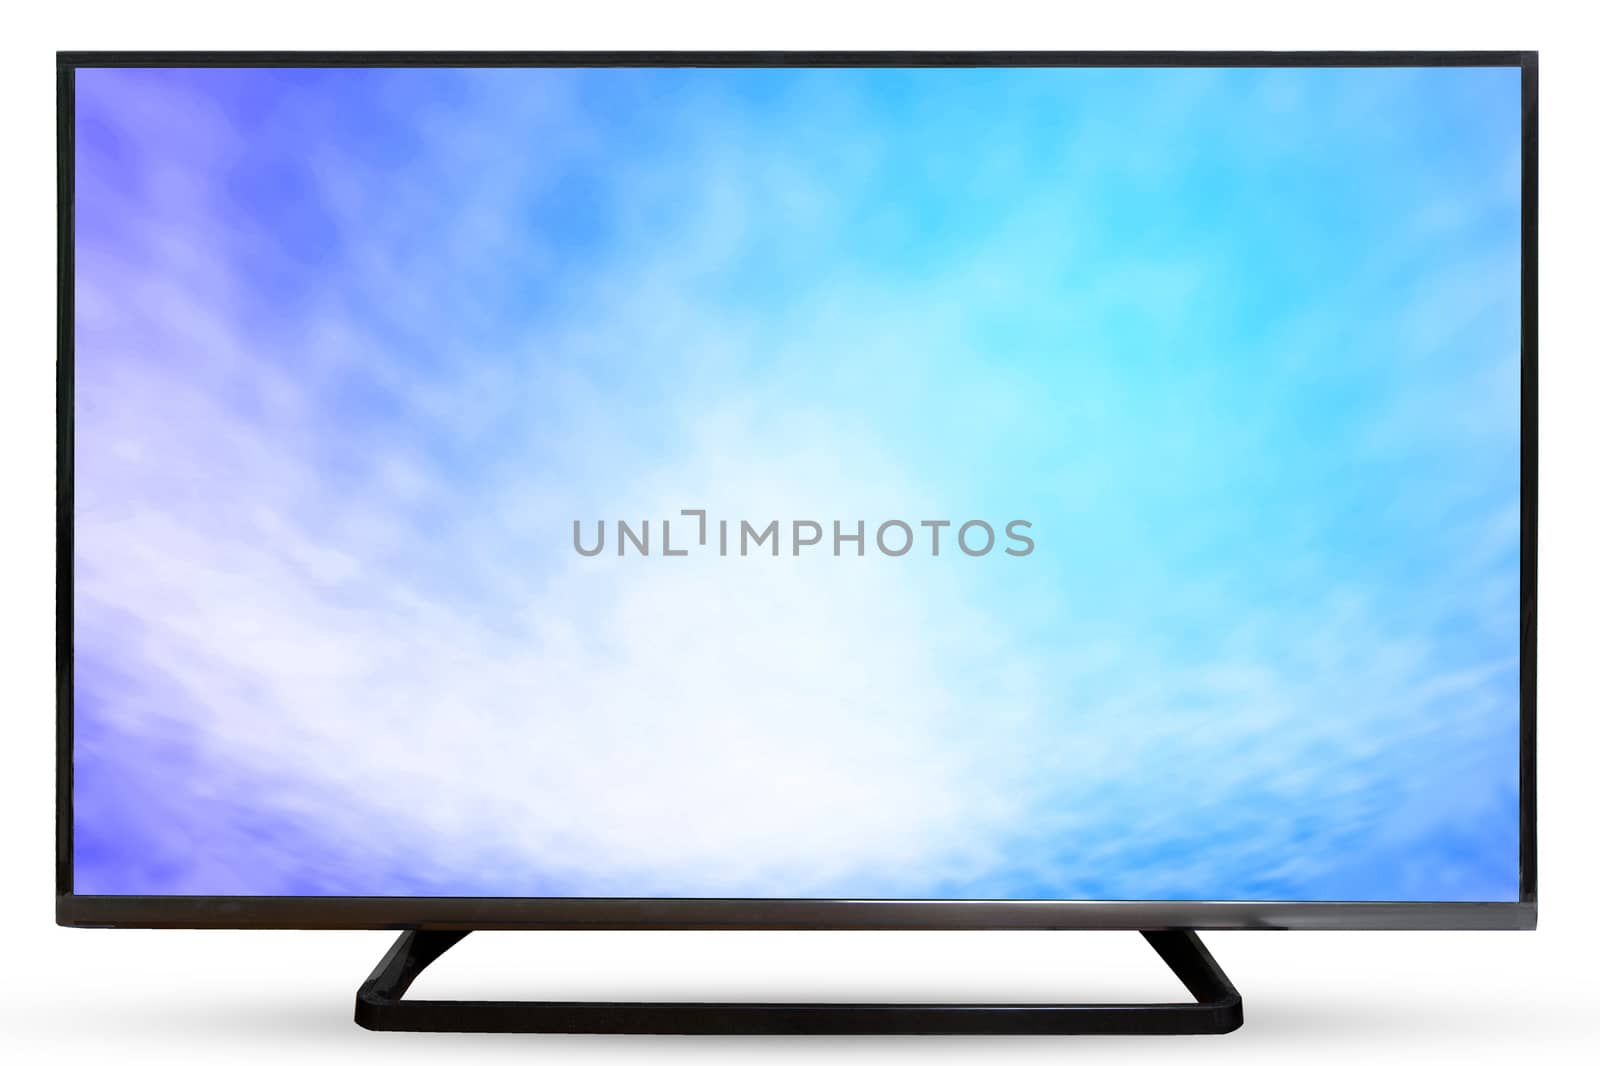 Television sky or monitor PC landscape isolated on white backgro by jayzynism